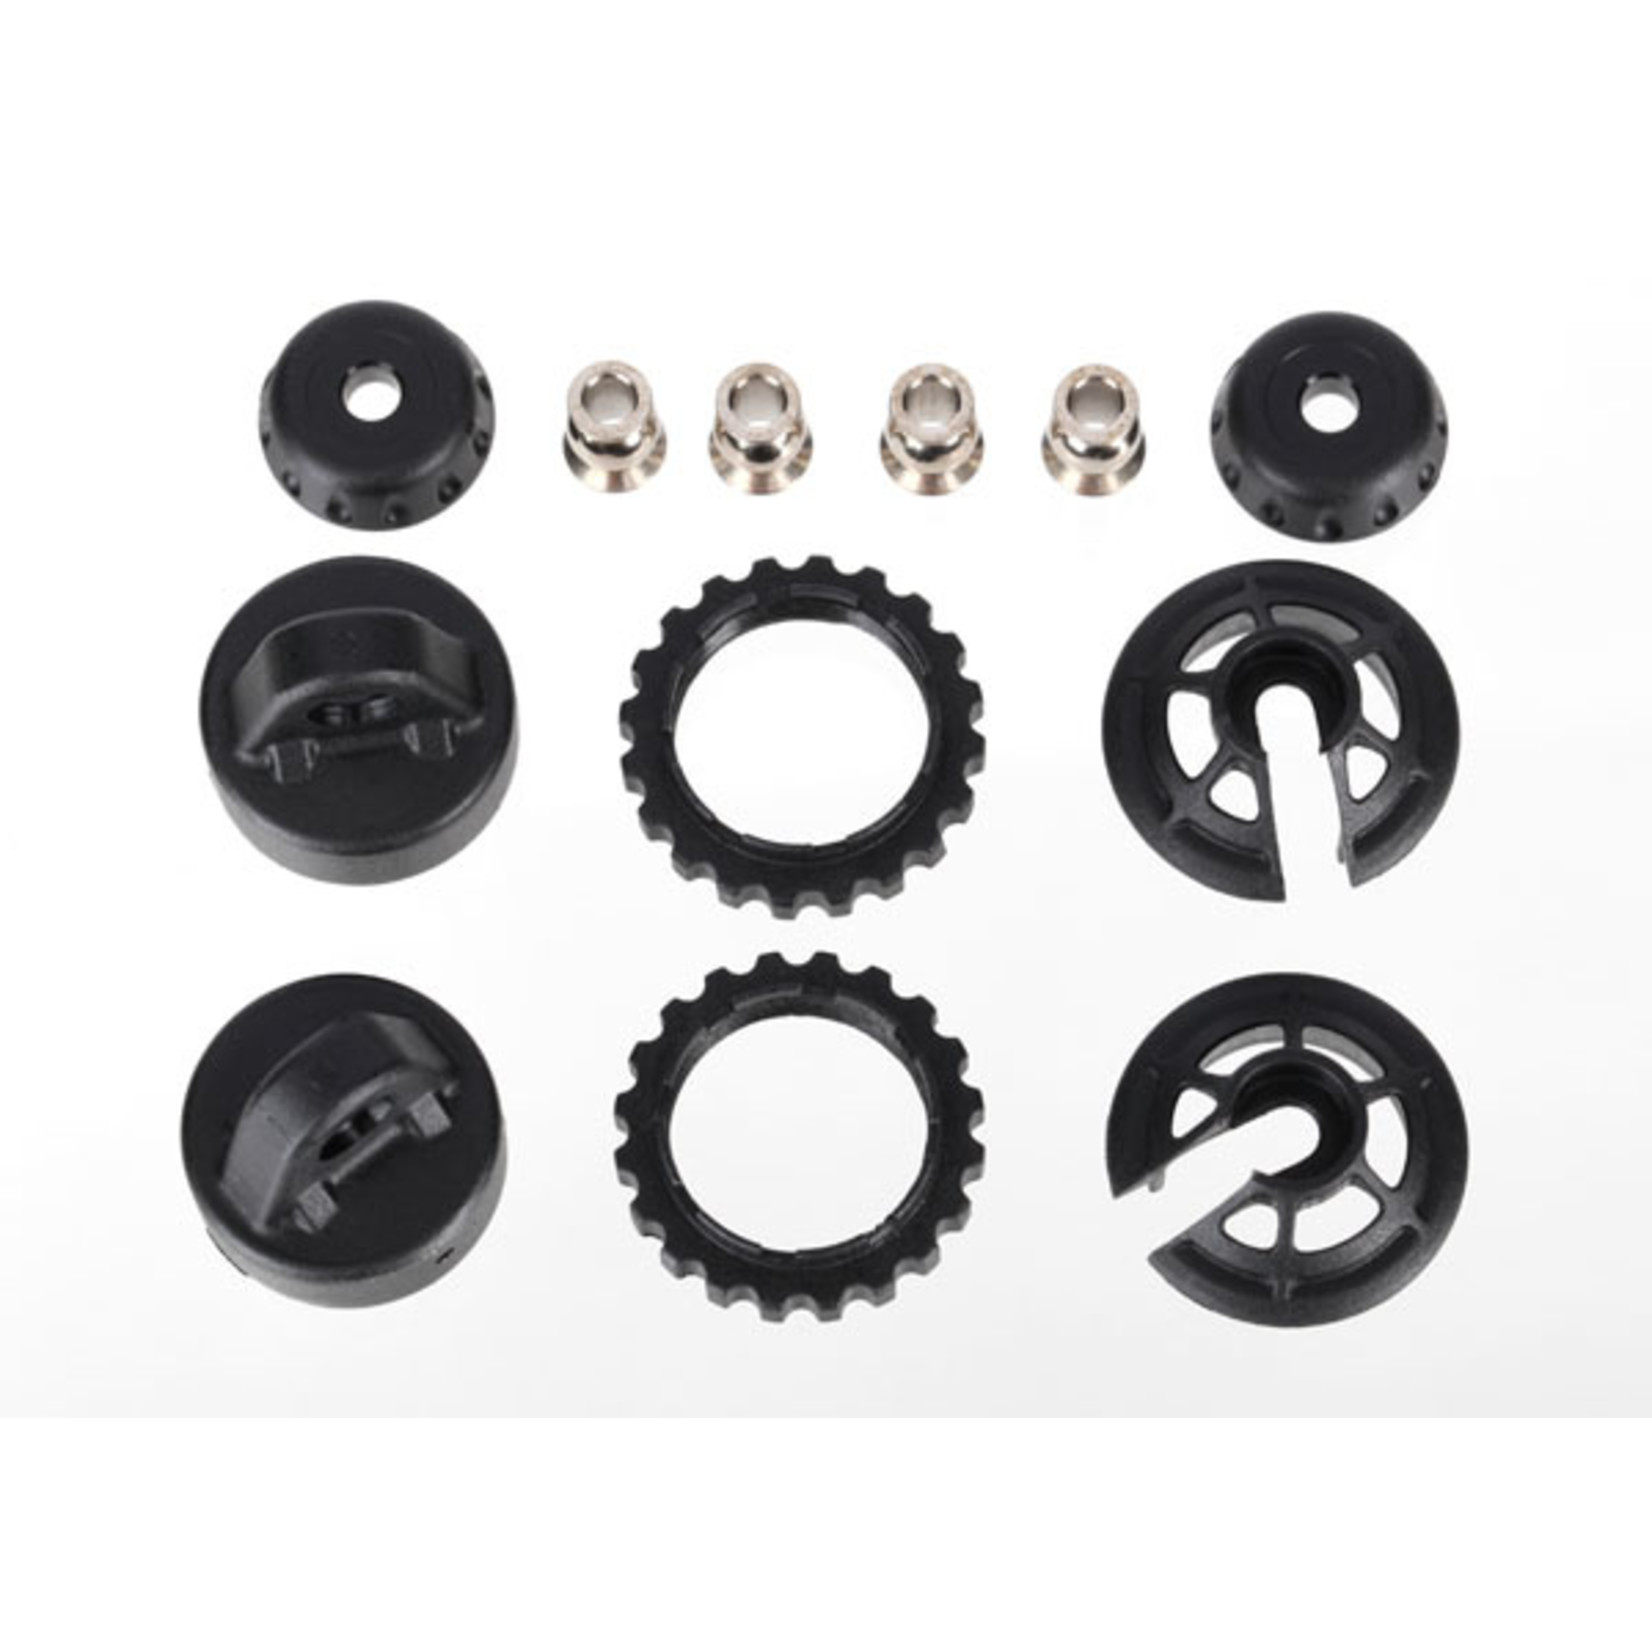 Traxxas 7468 - Caps and spring retainers, GTR long/xx-long shoc